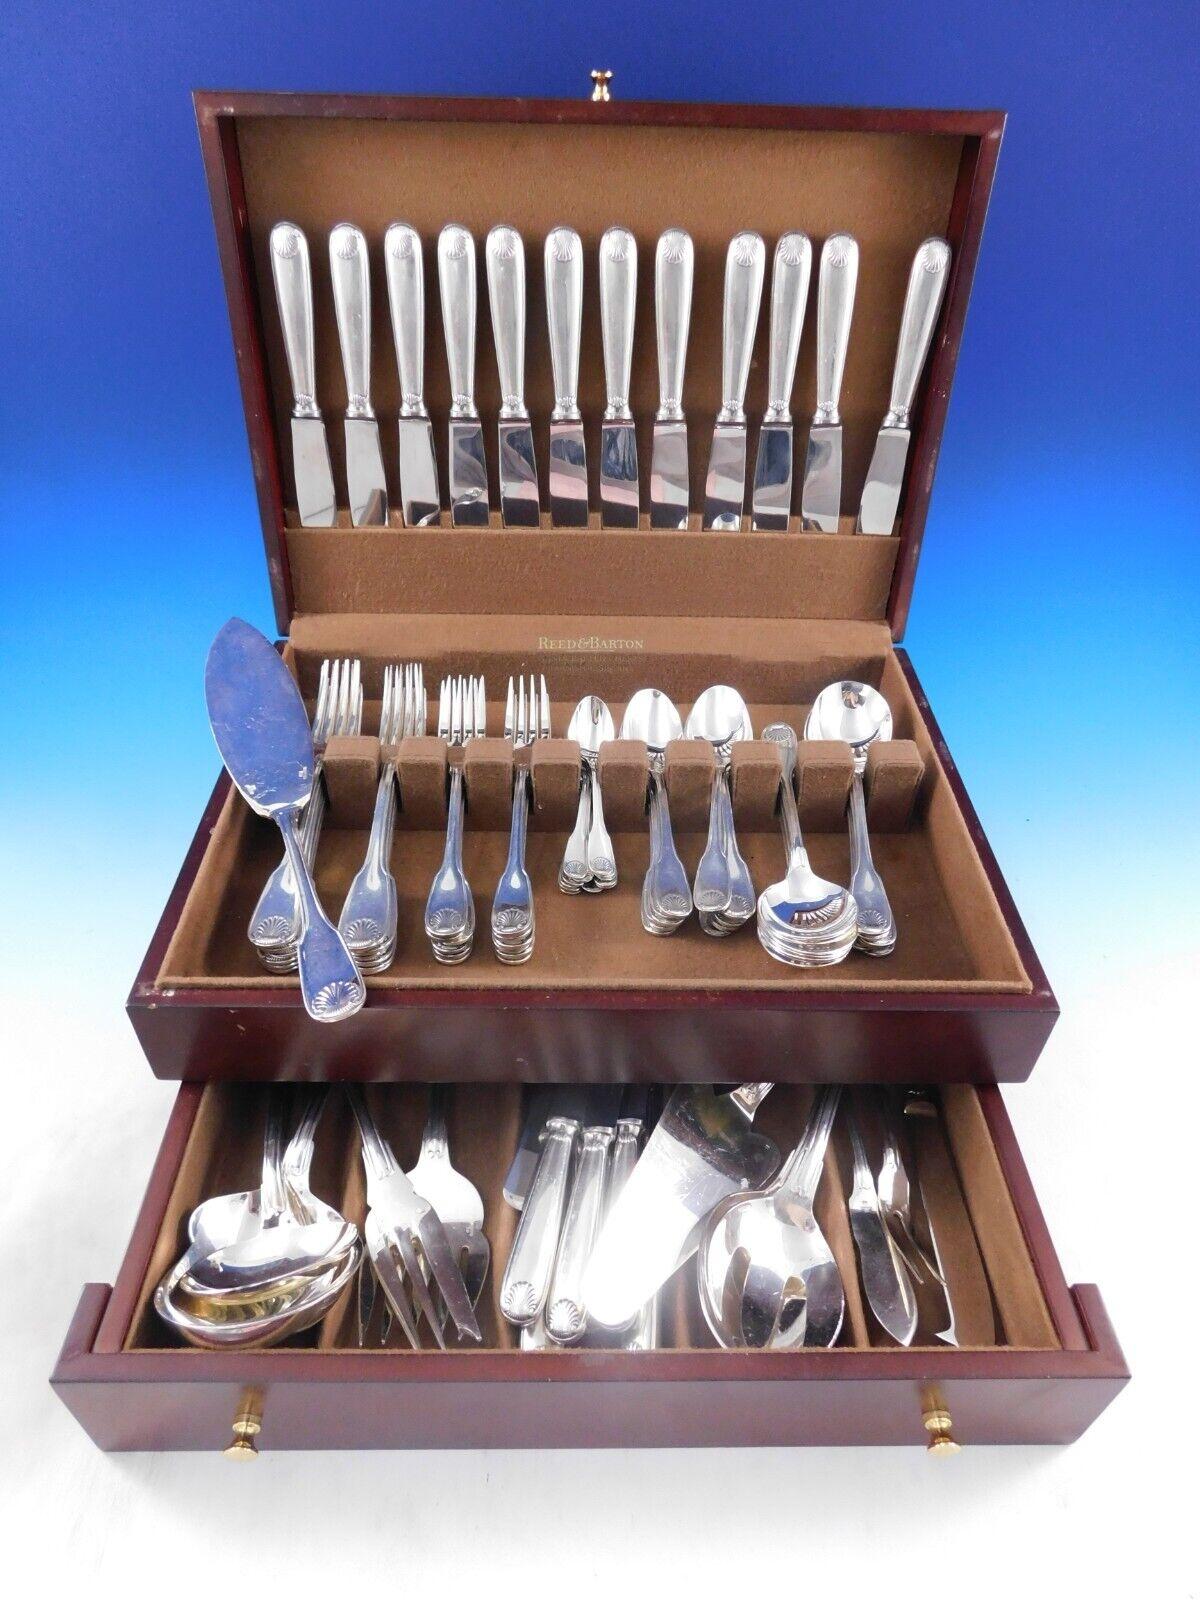 Vendome Arcantia by Christofle France Silverplated flatware set, 96 pieces. This pattern features the same shell motif that adorned the ceremonial silverware used during the reign of King Louis XIV. This set includes:

12 Luncheon Knives, 8 1/4